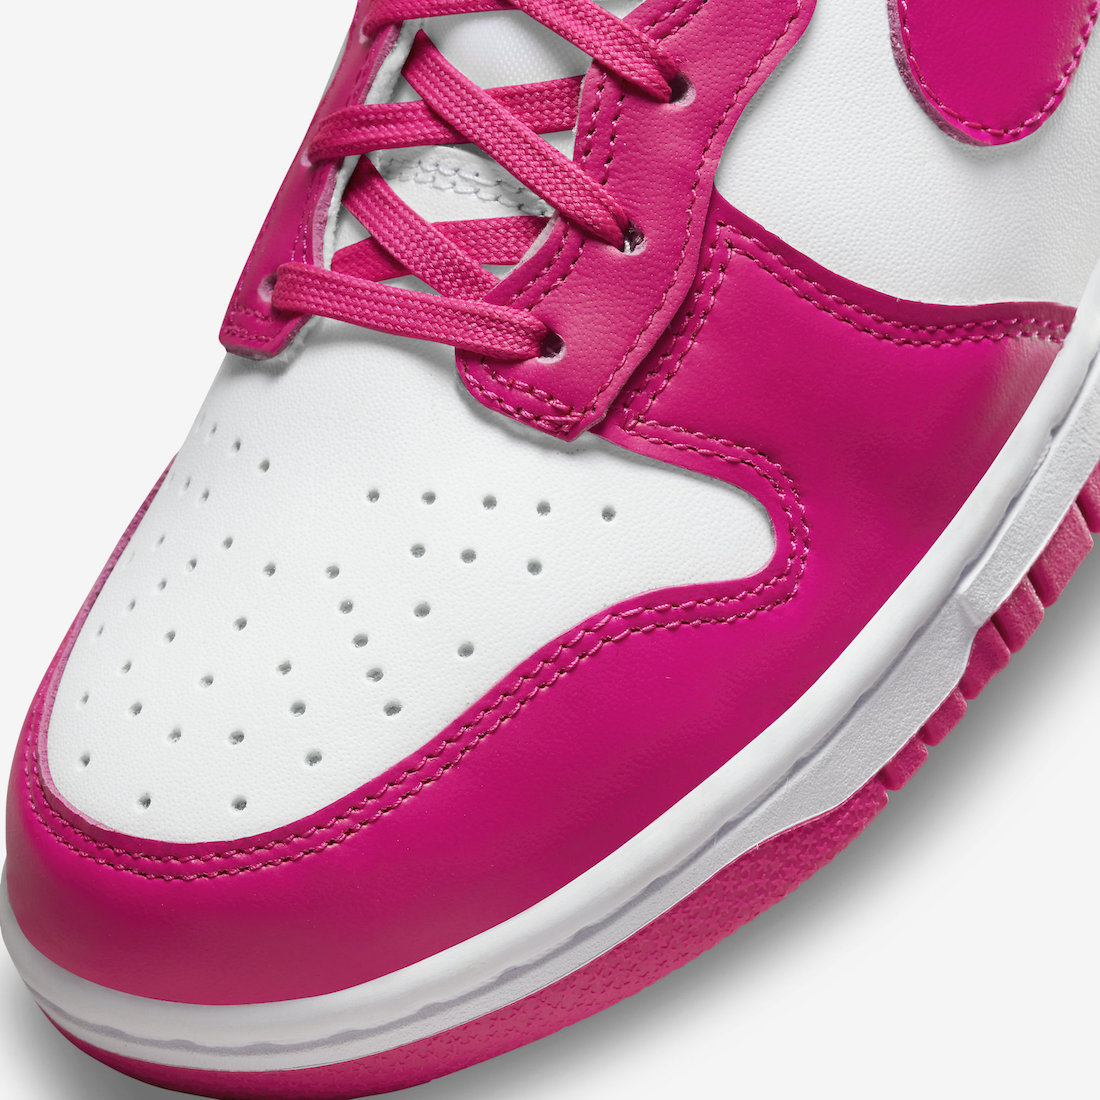 Nike Dunk High Pink Prime WMNS DD1869-110 Release Date